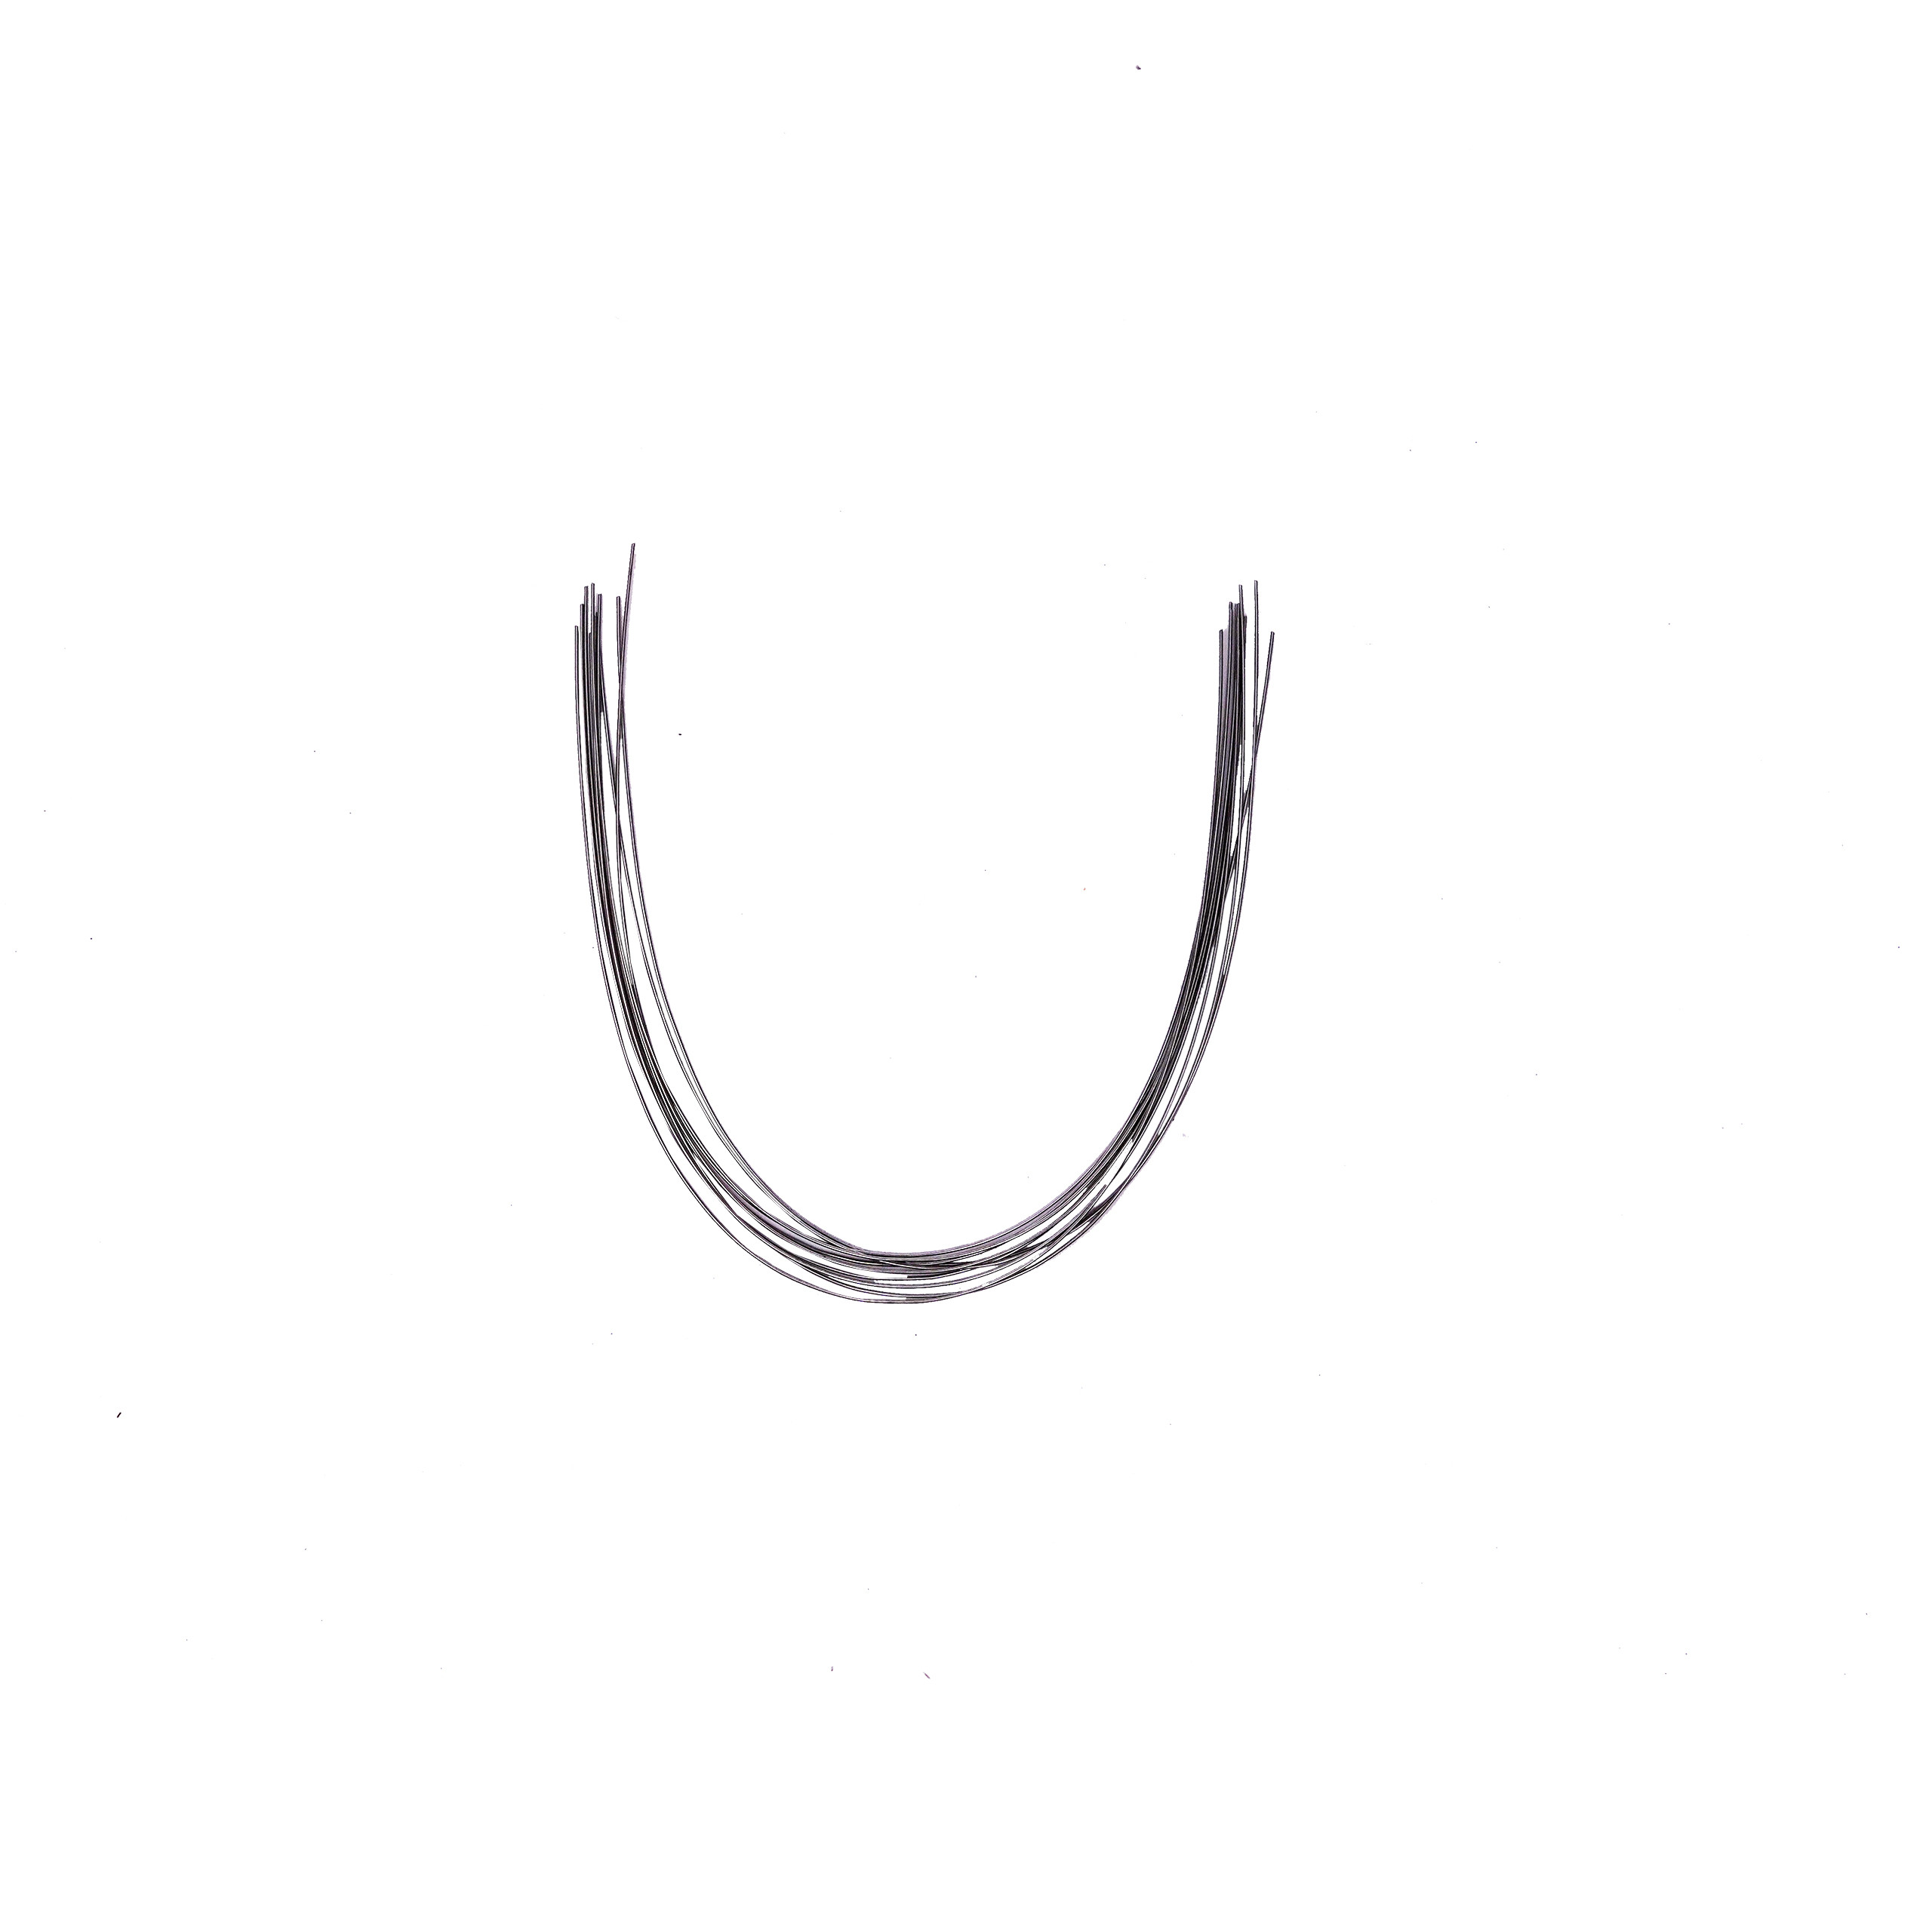 Prime Ortho NITI Arch Wire (Pack Of 10)